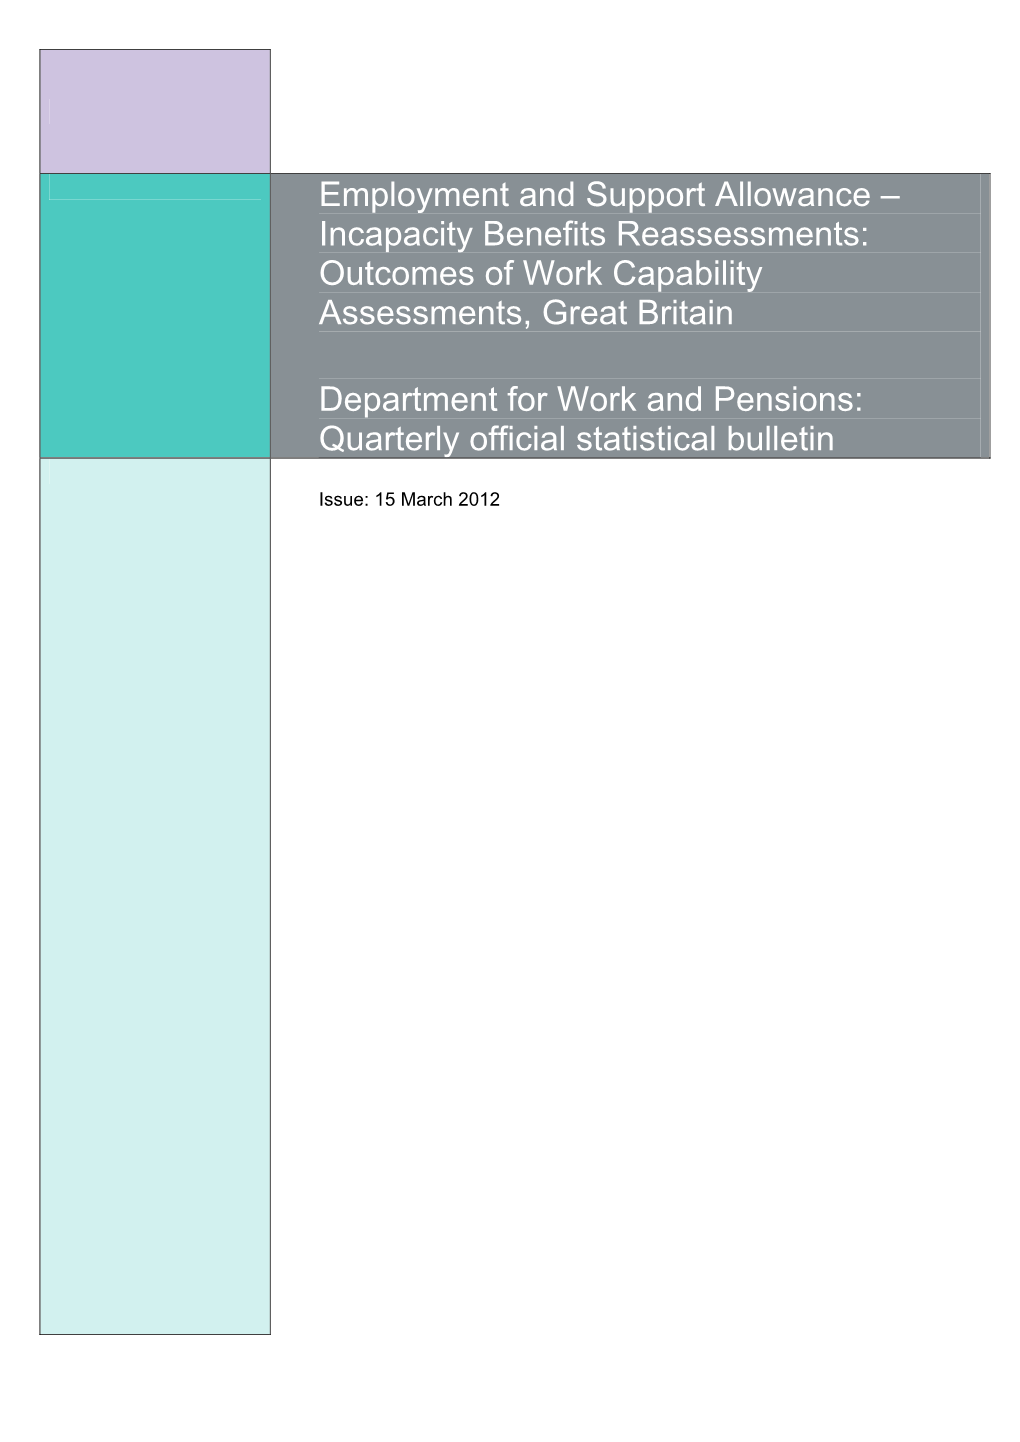 Employment and Support Allowance – Incapacity Benefits Reassessments: Outcomes of Work Capability Assessments, Great Britain